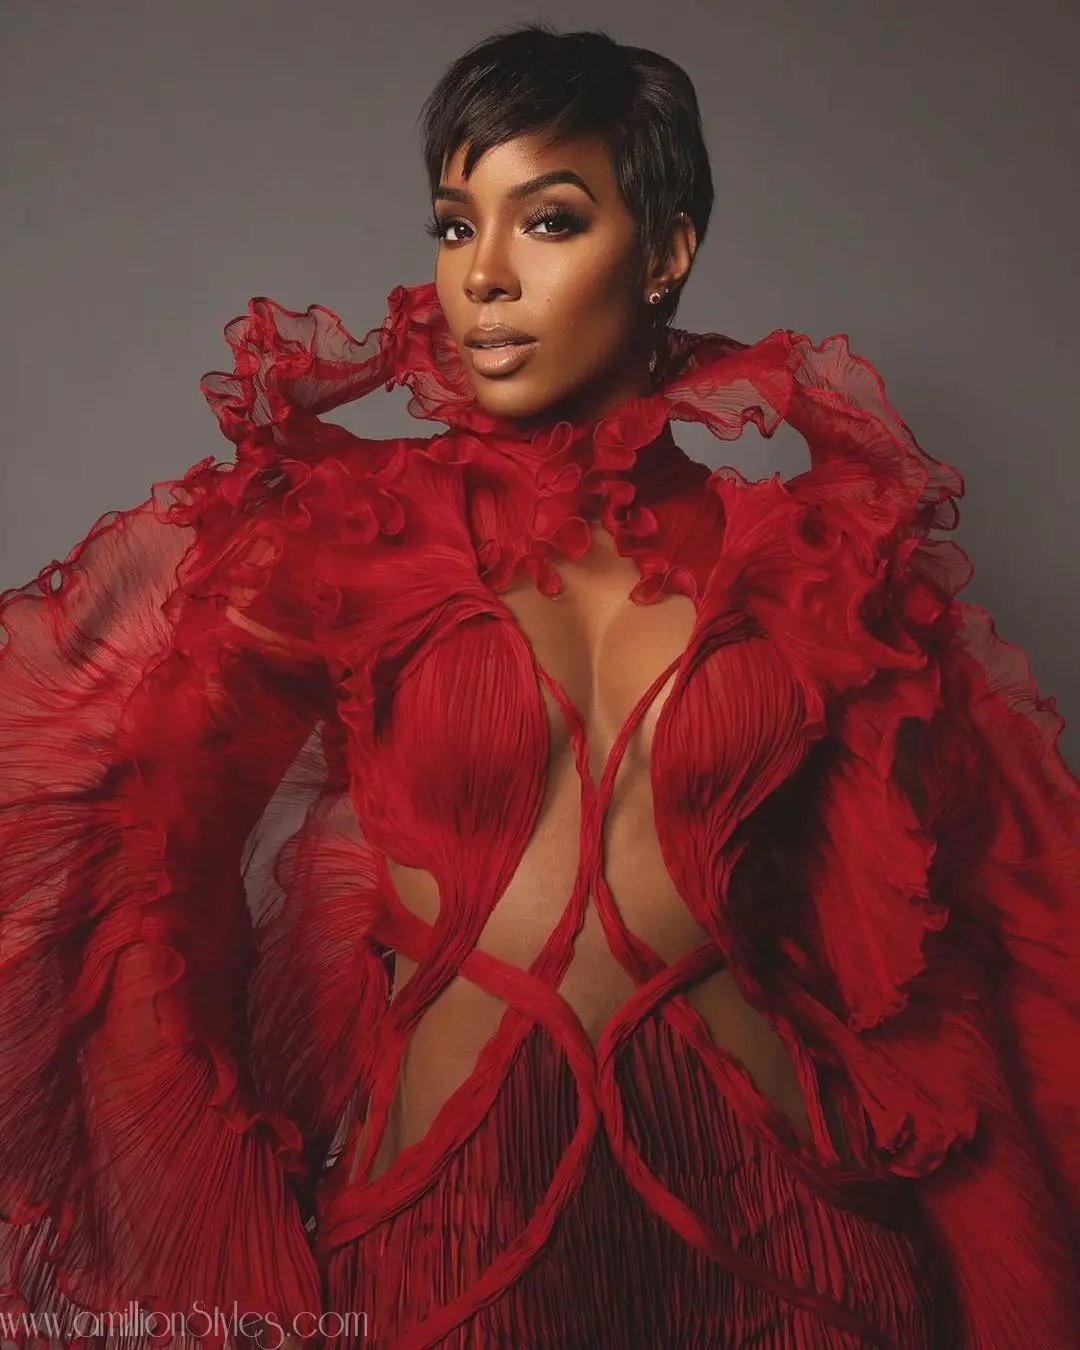 Kelly Rowland Dazzled In This Fiery Red Dress From Iris van Herpen